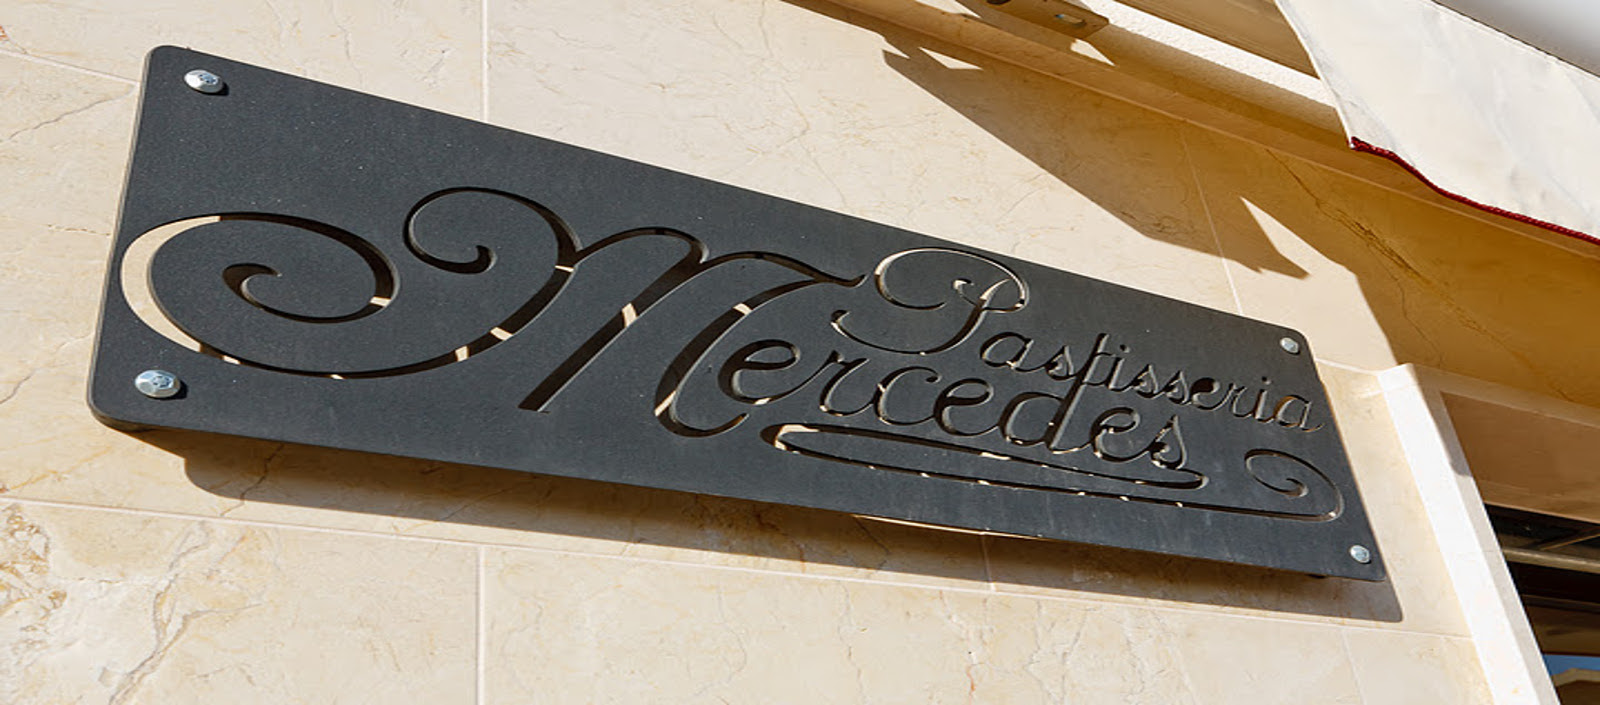 Welcome to Mercedetes Bakery